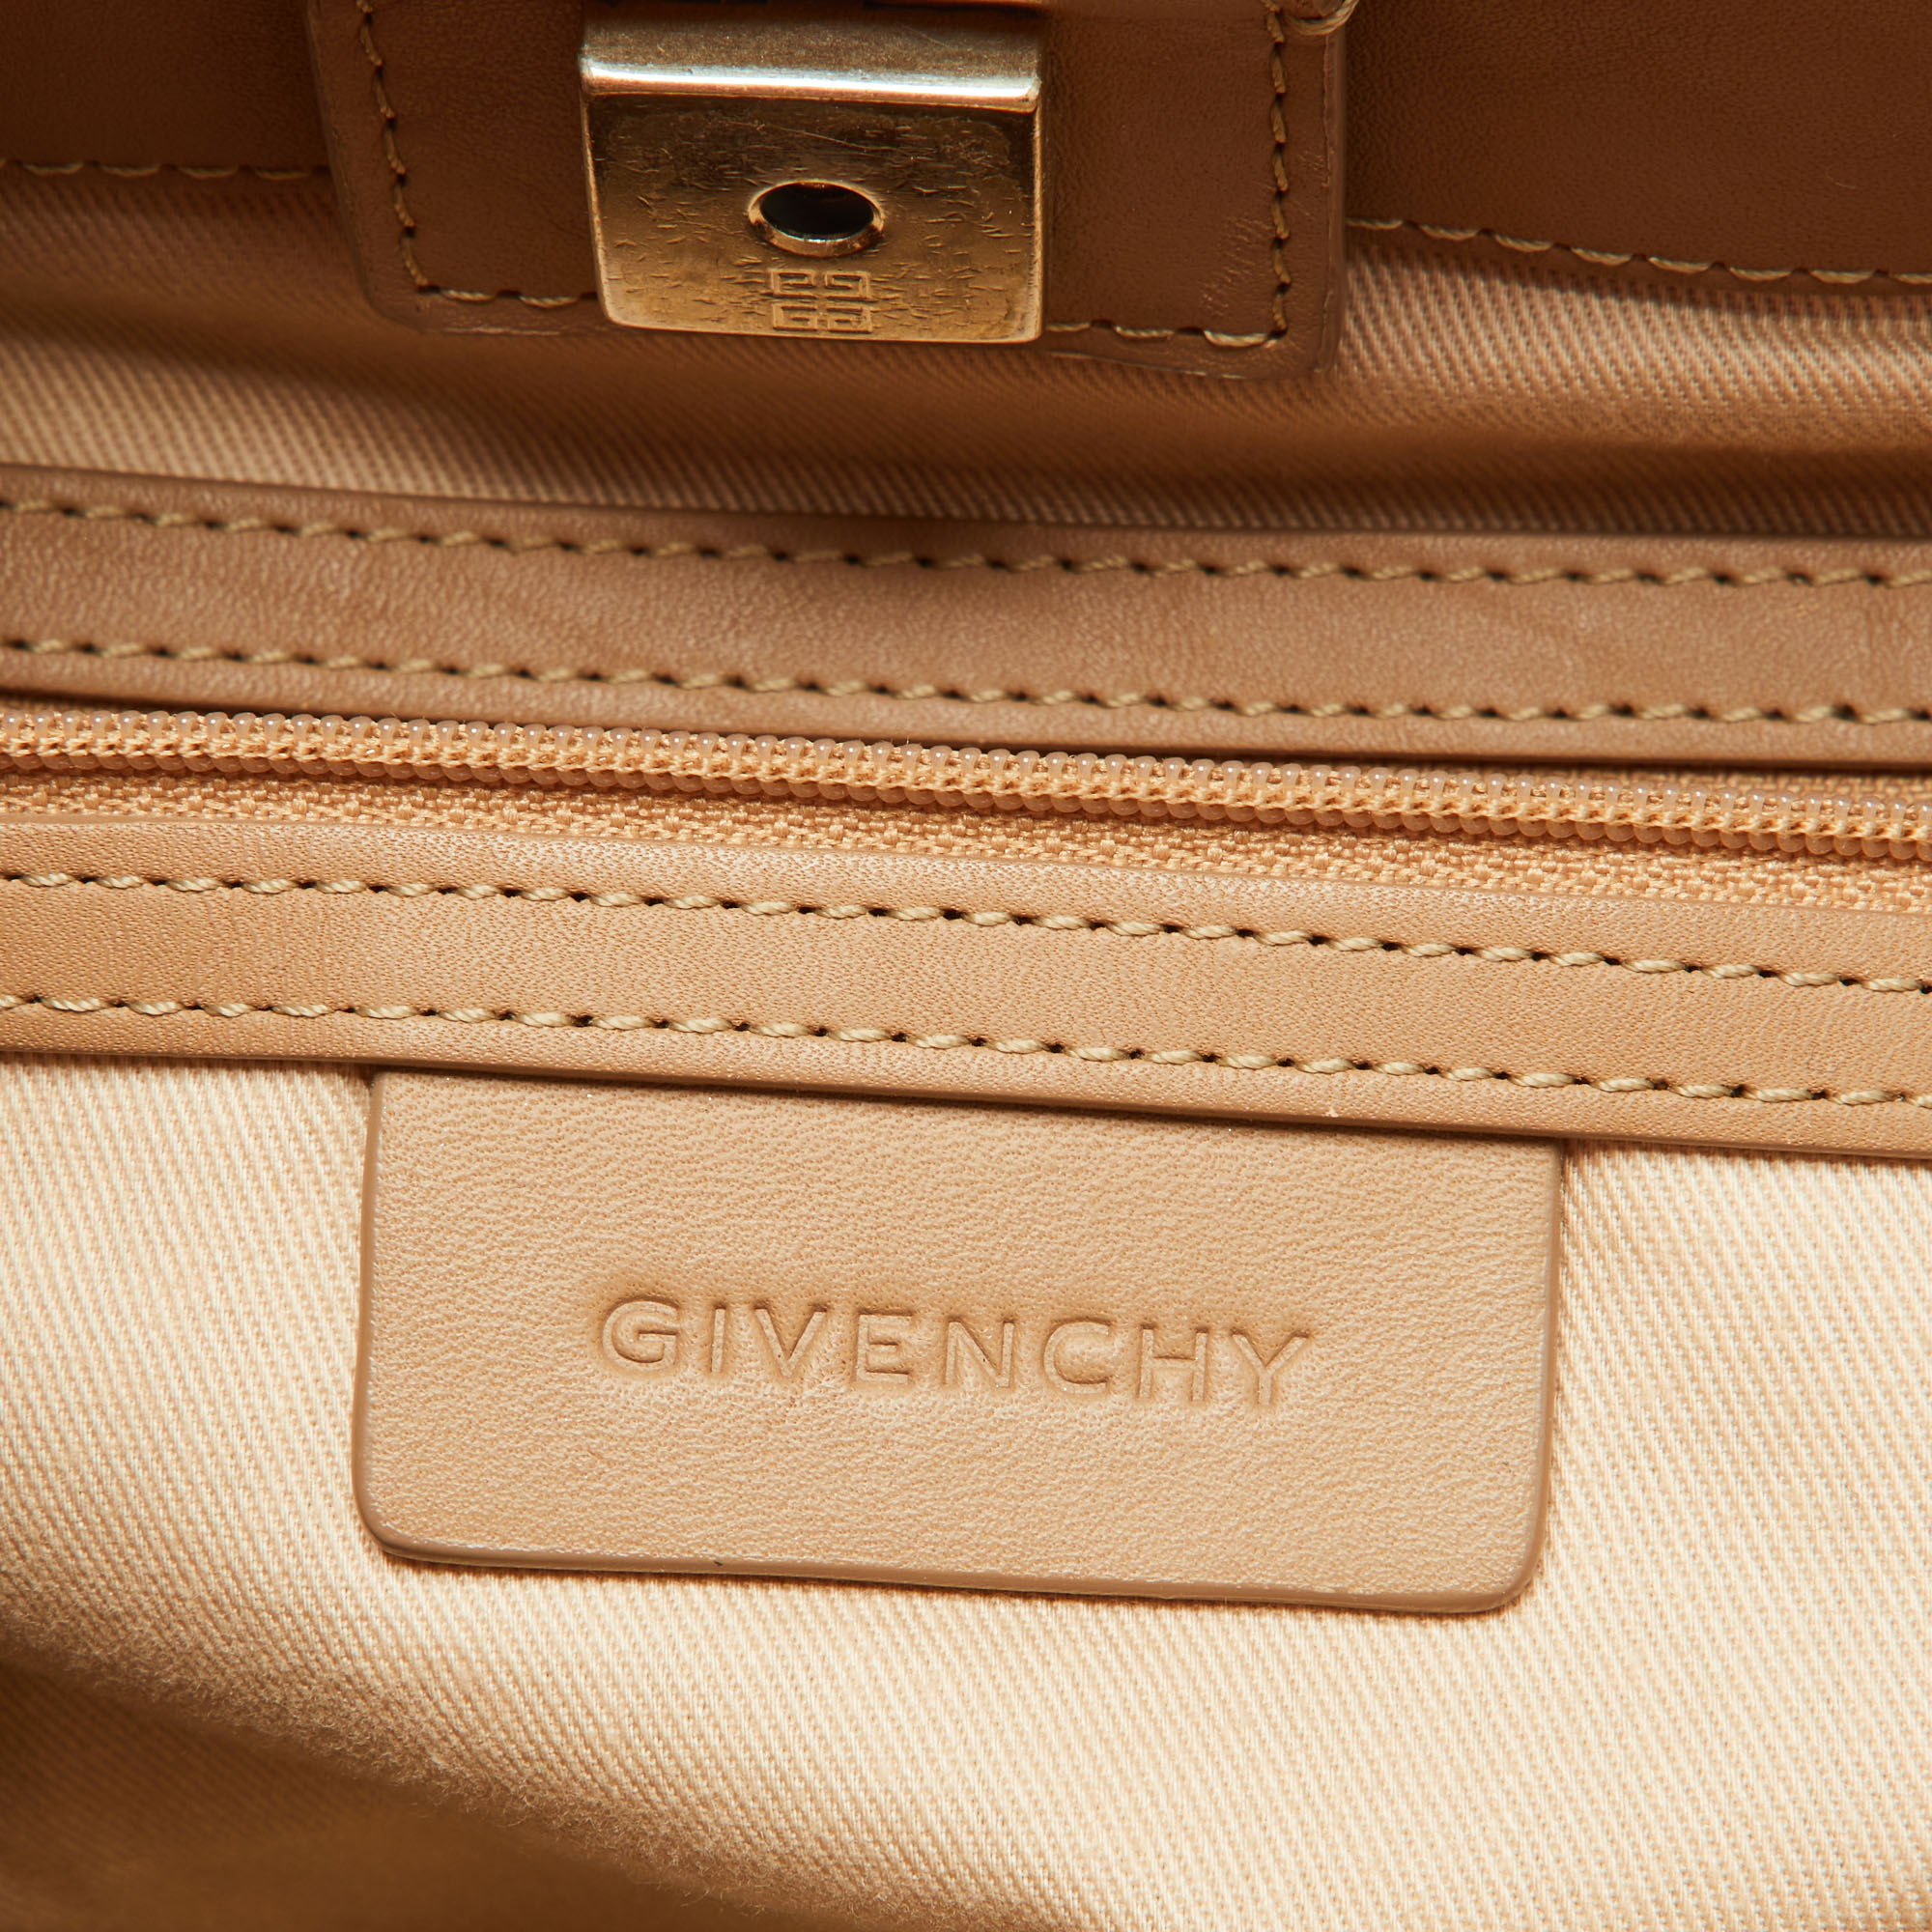 Givenchy Beige/Cream Monogram Coated Canvas And Leather Double Zip Tote